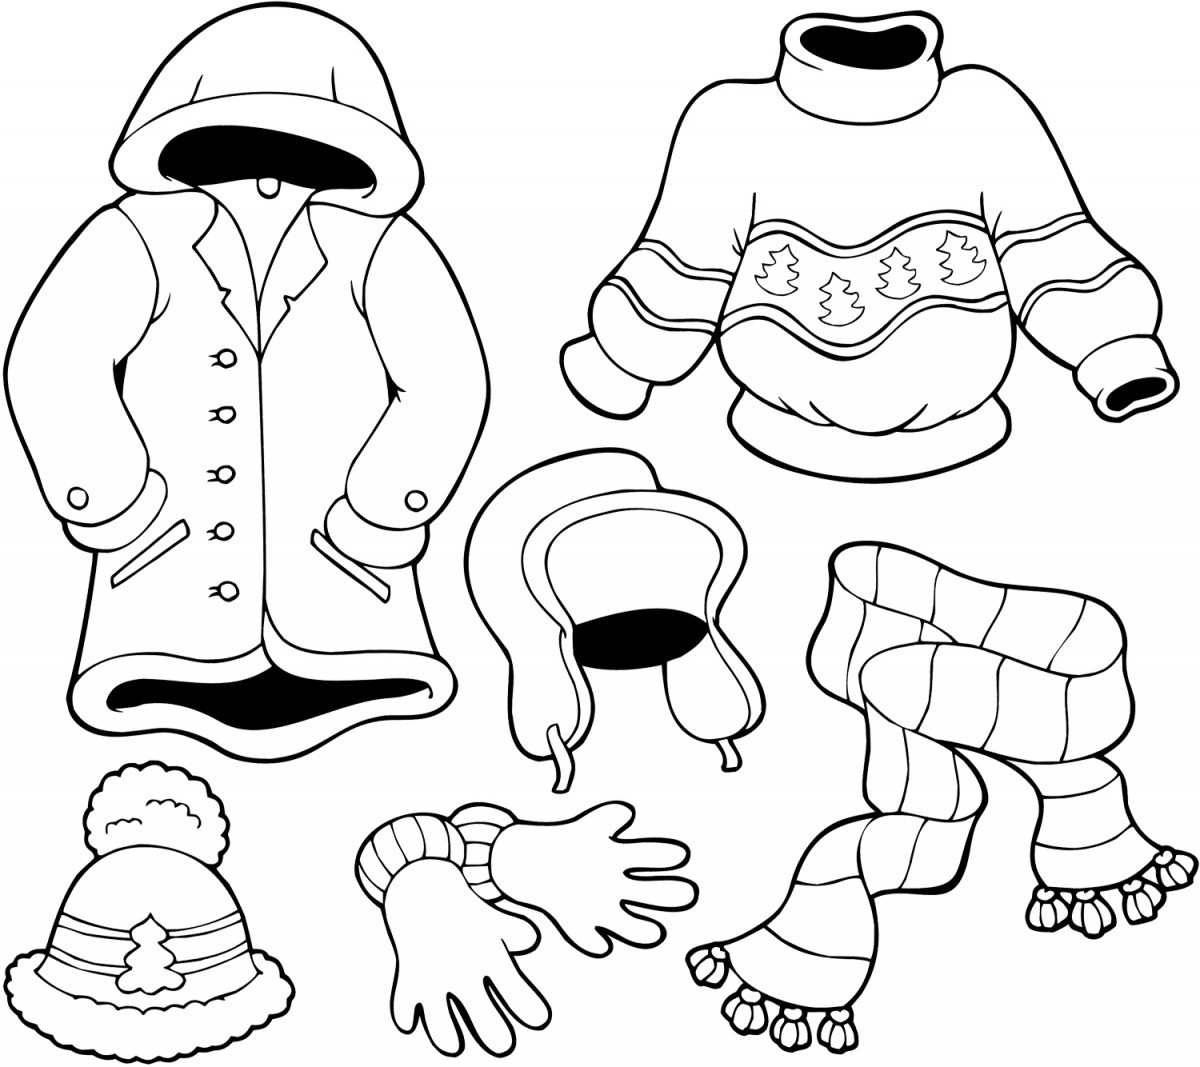 Winter Coloring Pages For Kids
 Winter Season Coloring Pages